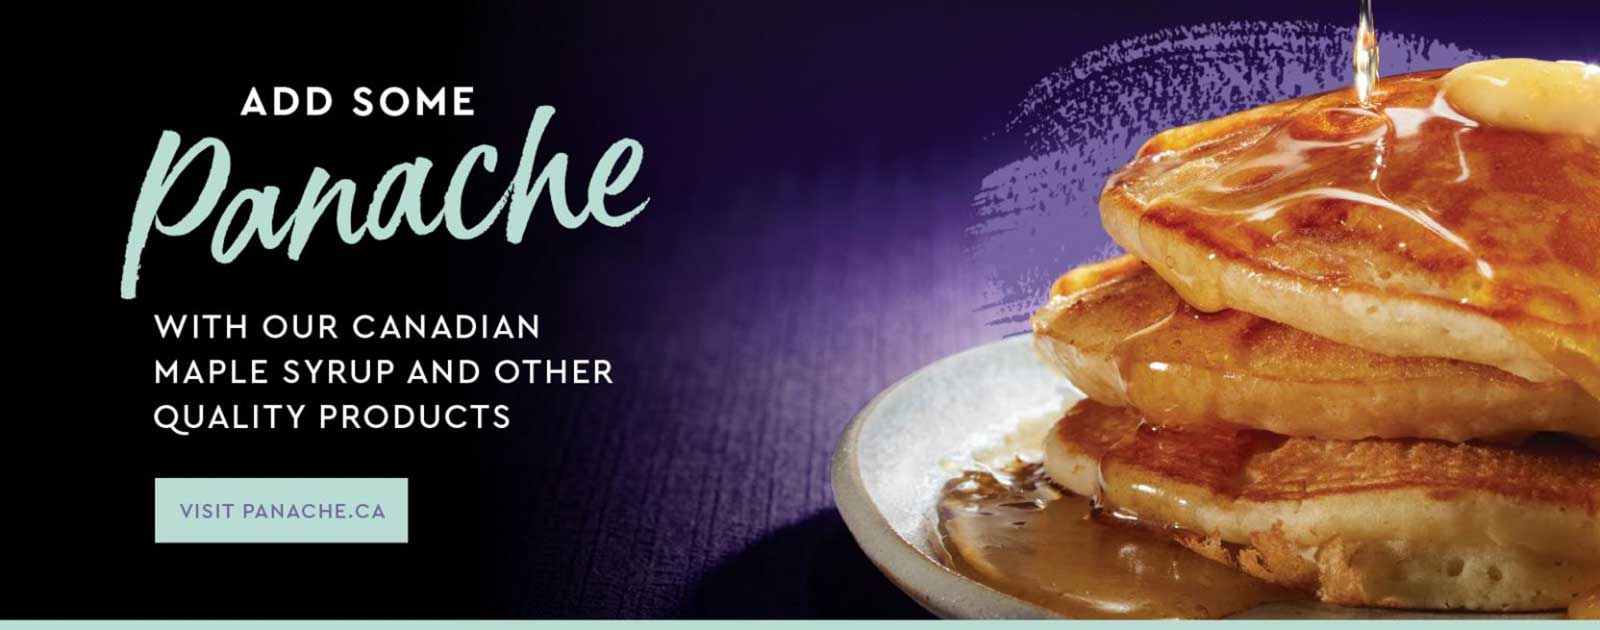 Text Reading 'Add some Panache with our Canadian maple syrup and other quality products.' Visit Panache.ca to explore our more products.